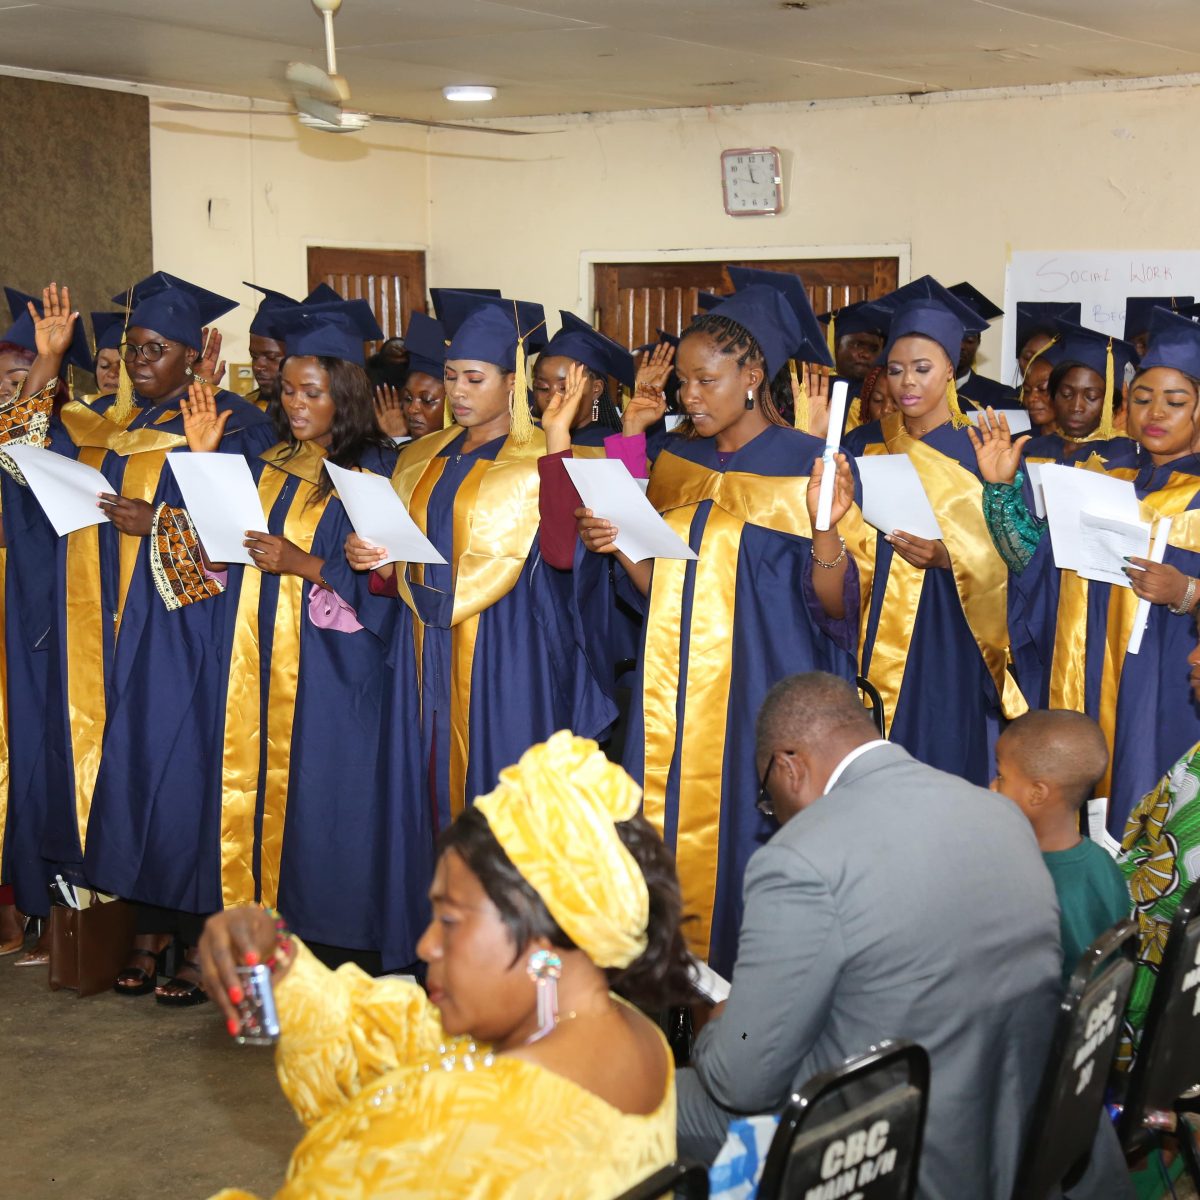 Graduating social workers taking the oath of confidentiality